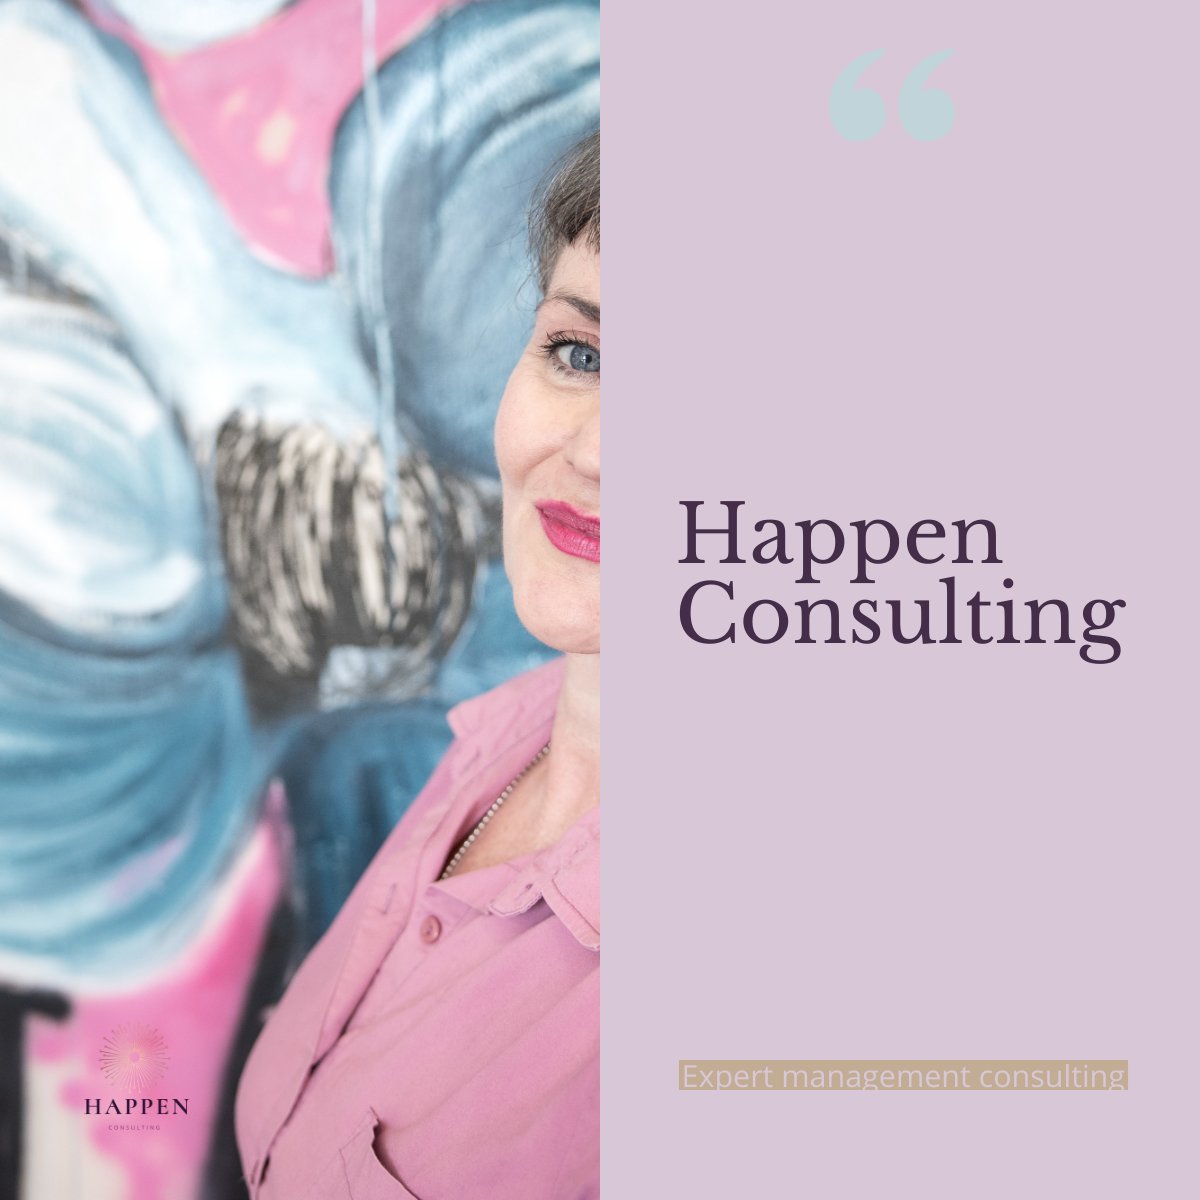 Visit happenconsulting.com.au to find out how I can help improve your business!

 #perthbusiness #perthsmallbusiness #perthsummer #perthlifestyle #perthstyle #perthlocal #icwest #perthfoodies #seeperth #soperth #waisok #anotherdayinwa #smallbusinessperth #perthevents #perthnow